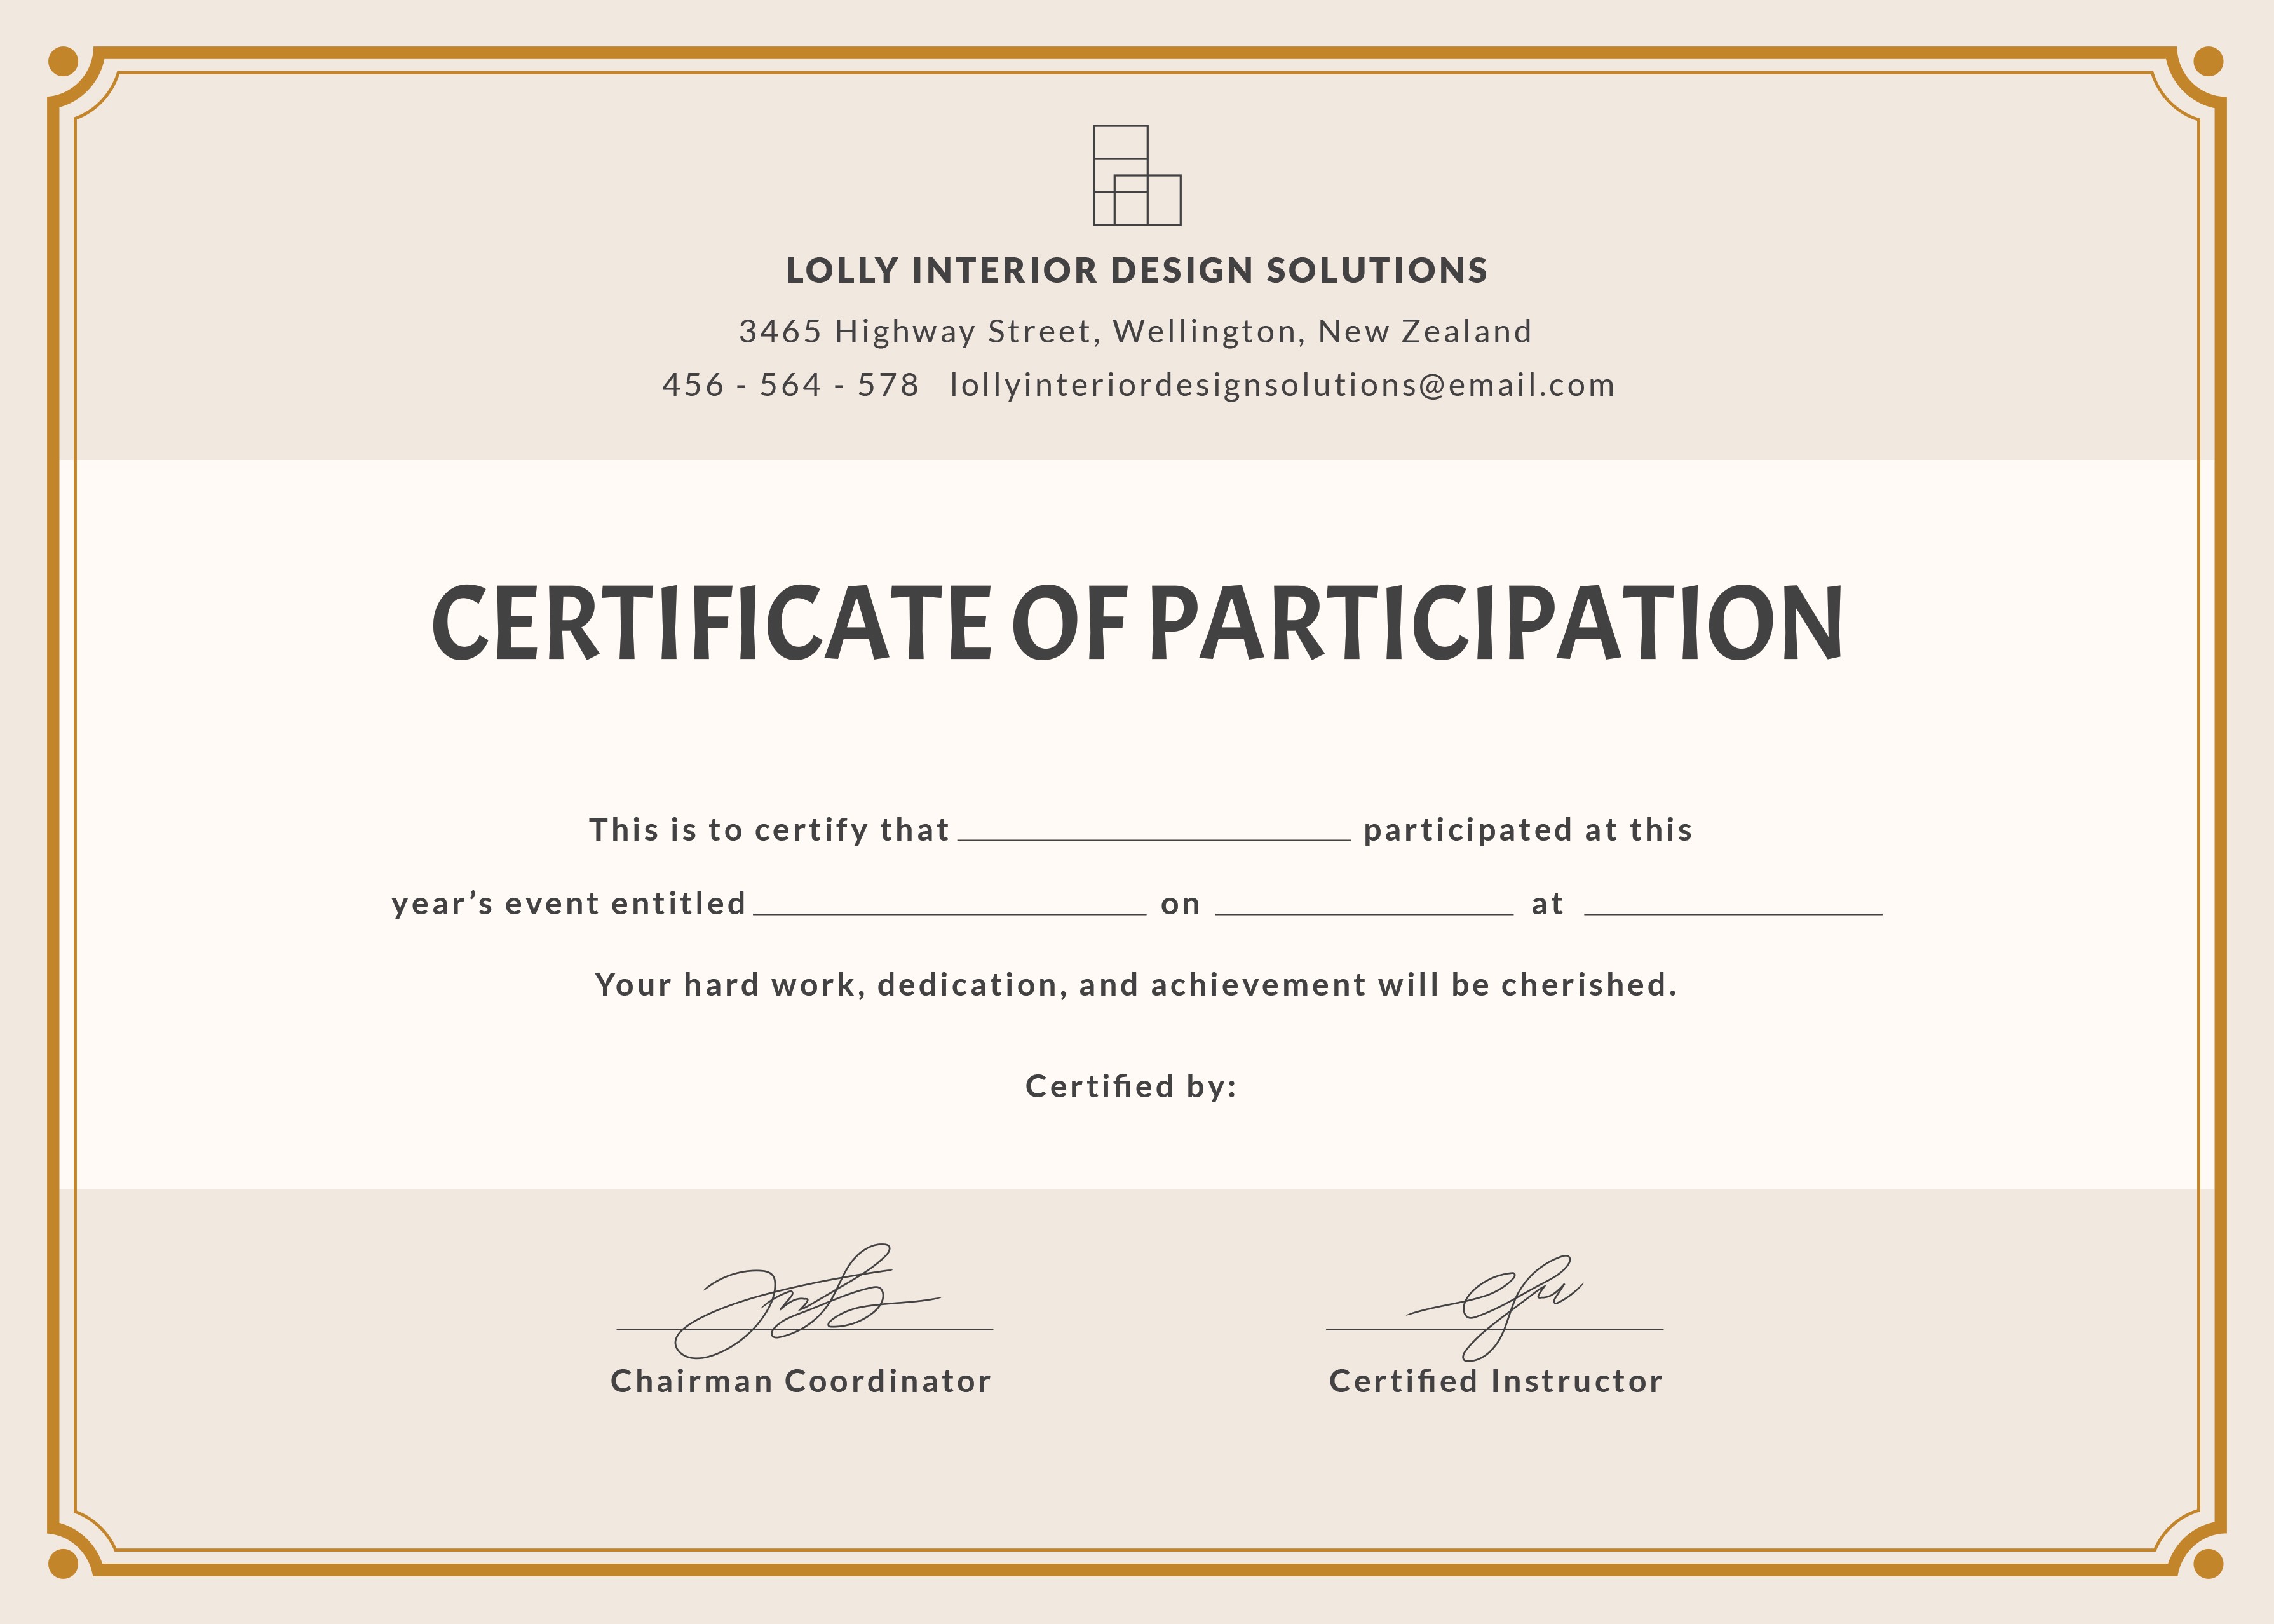 Certificate Participation Ukran Agdiffusion Com Images Of